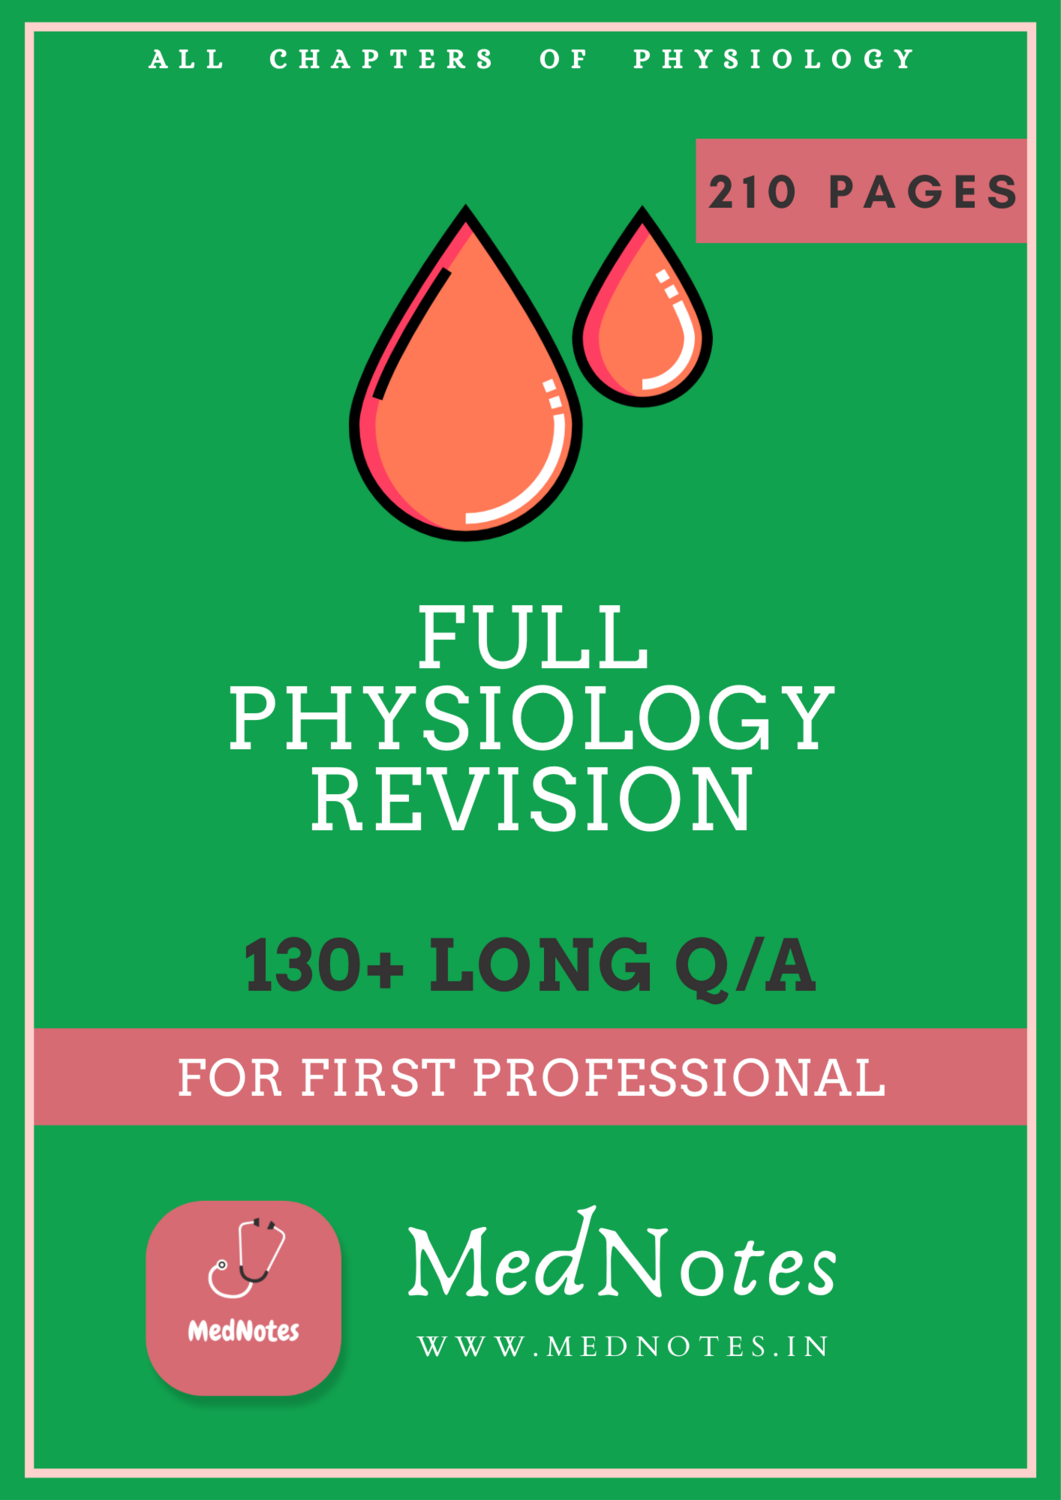 Full Physiology Revision - First Professional [E-book]